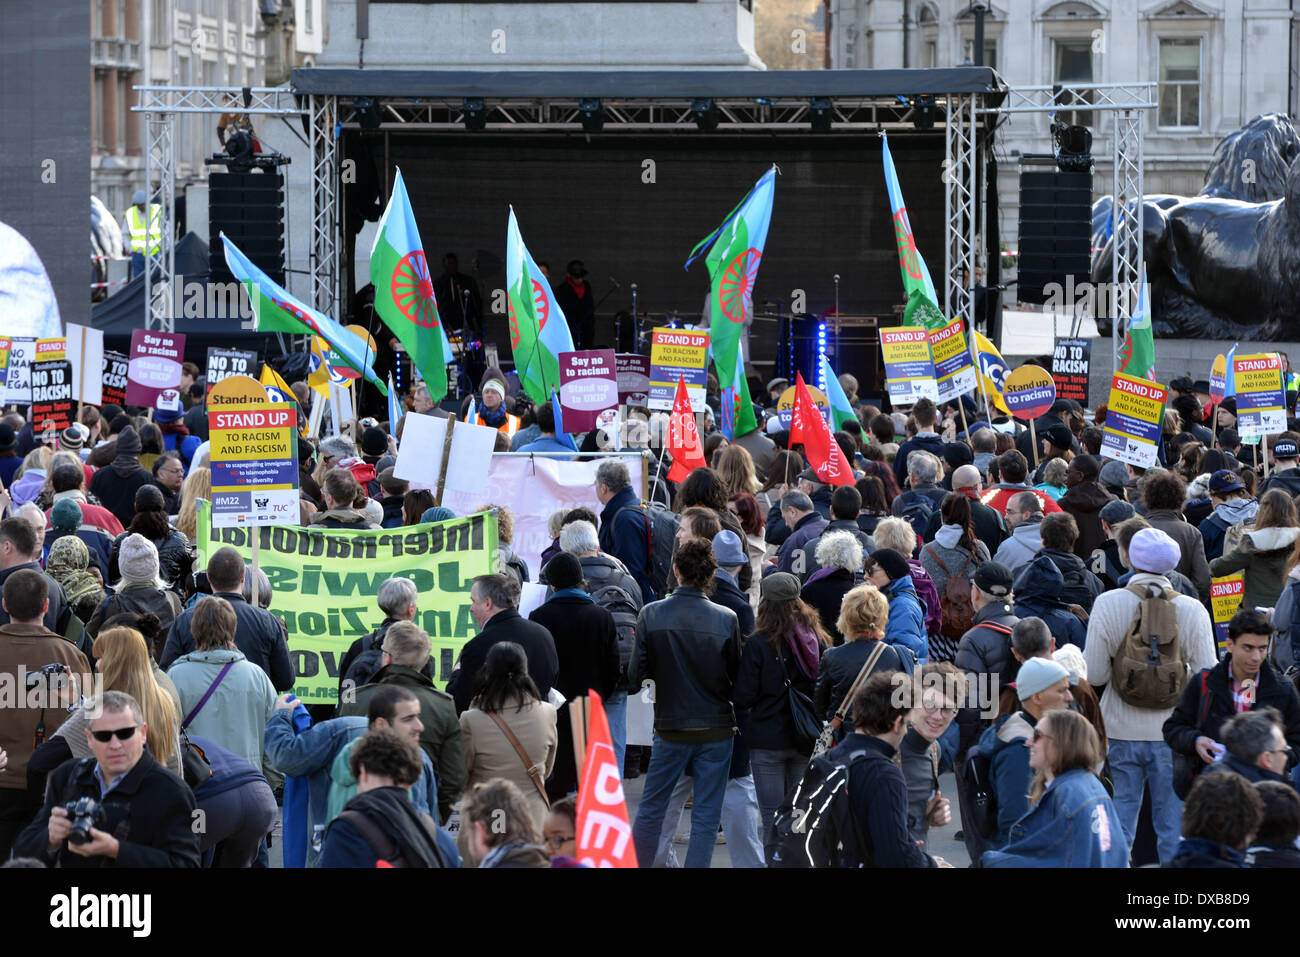 London UK. 22nd March 2014. Thousands of anti-racism and anti-fascism protesters and supporters marched from Westminster’s Parliament buildings to a rally in Trafalgar Square, London. The demonstration falls on United Nations Anti-Racism Day. Photo by See Li/Alamy Live News Stock Photo